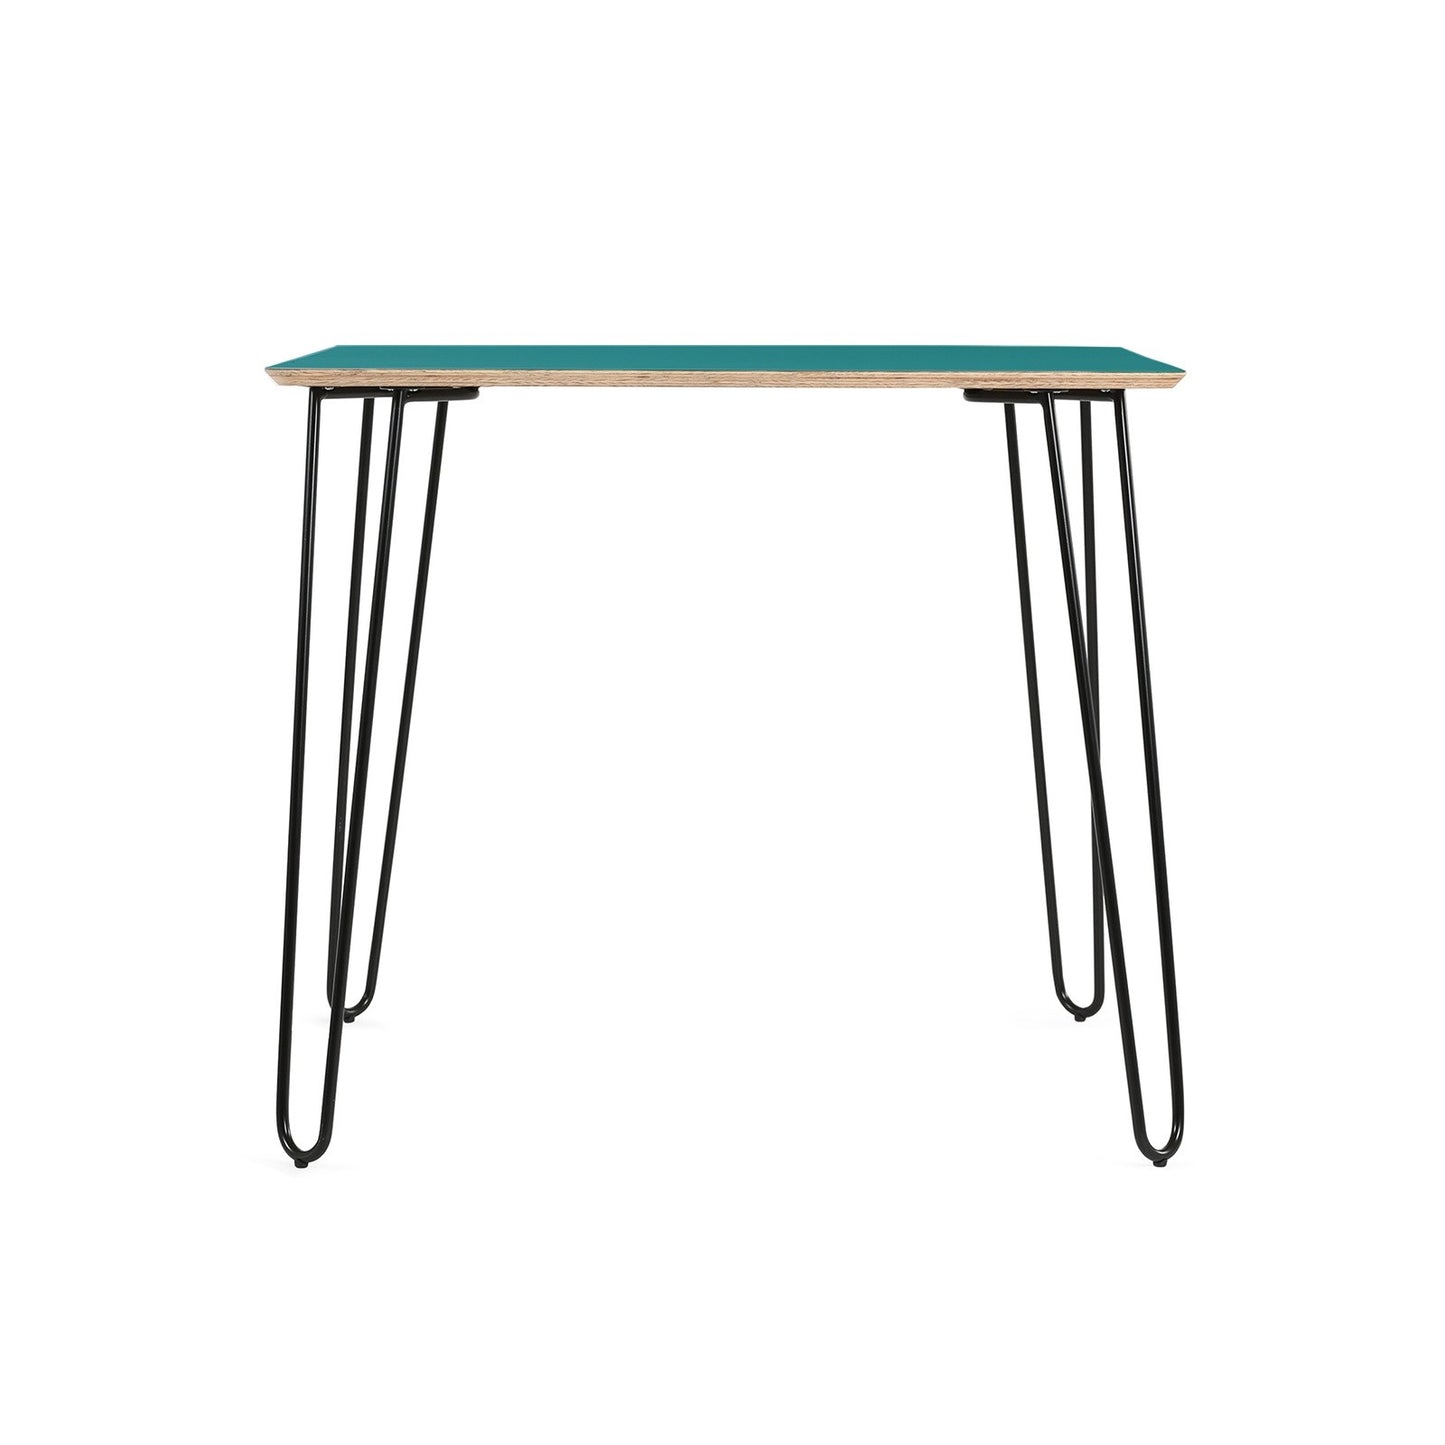 Table Mannequin MQ 03 - Turquoise